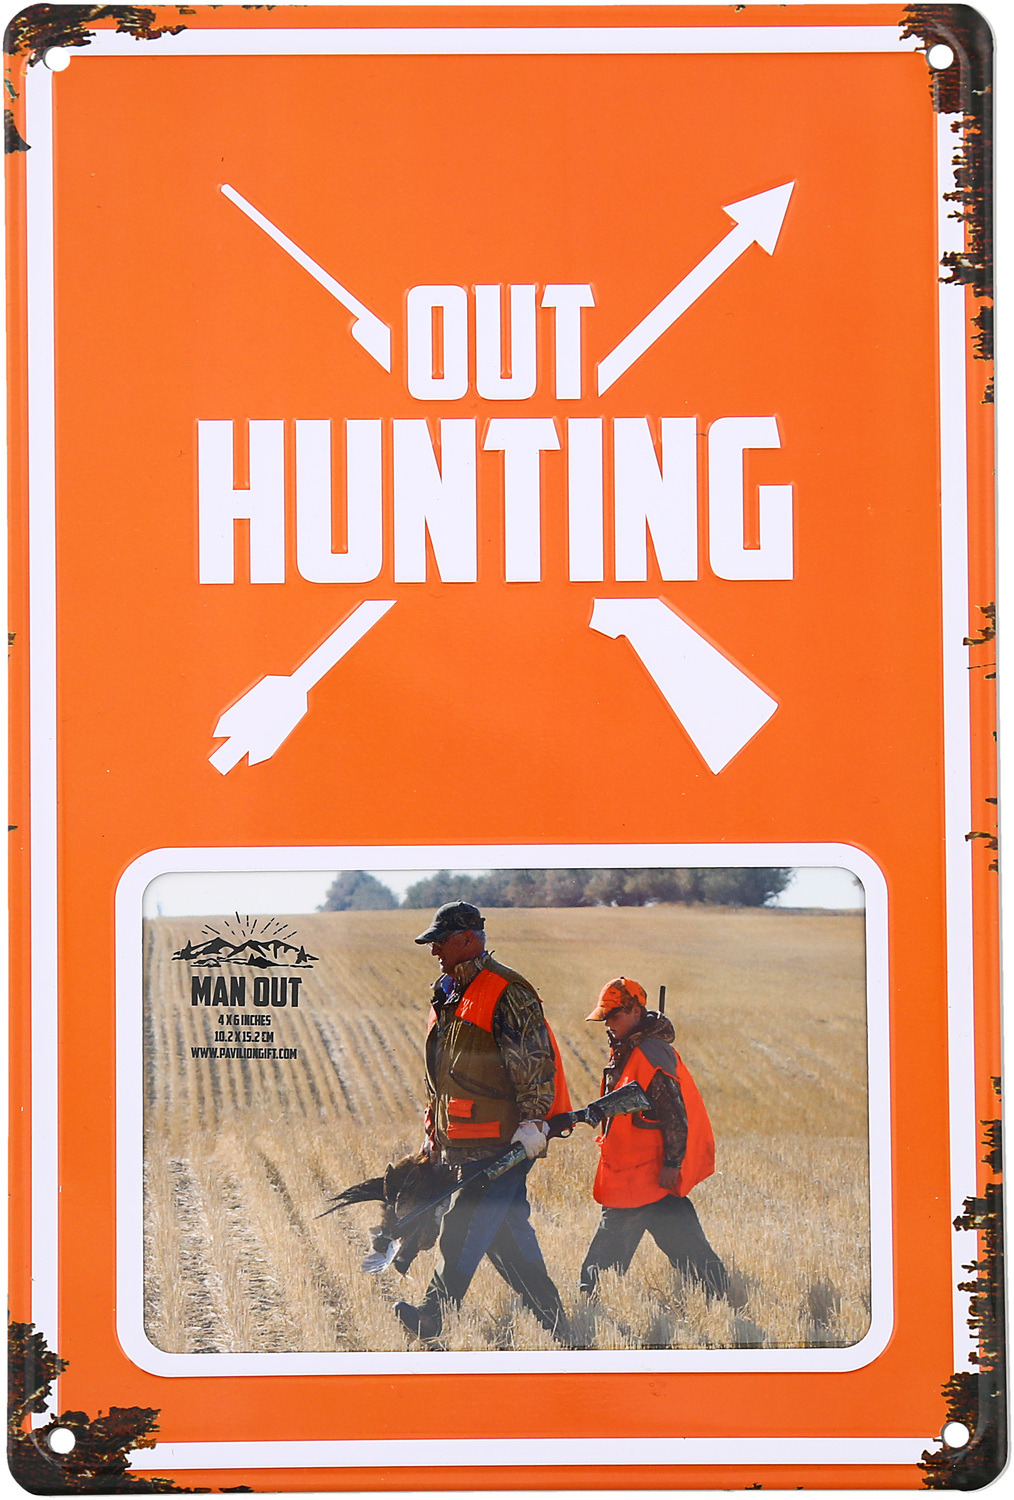 Out Hunting by Man Out - Out Hunting - 8" x 11.75" Tin Frame
(Holds 6" x 4" Photo)